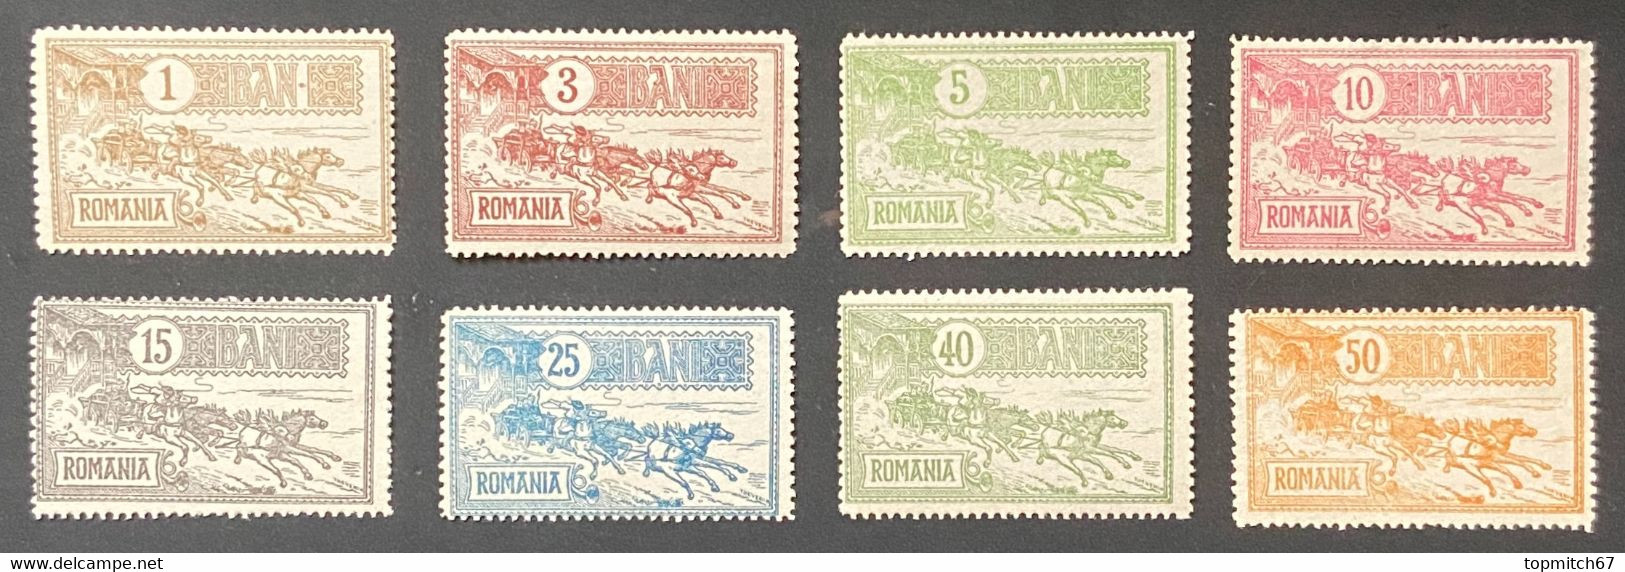 ROM0137-44MNH - Mail Coach - Complete Set Of 8 MNH Stamps - Romania - 1903 - Unused Stamps